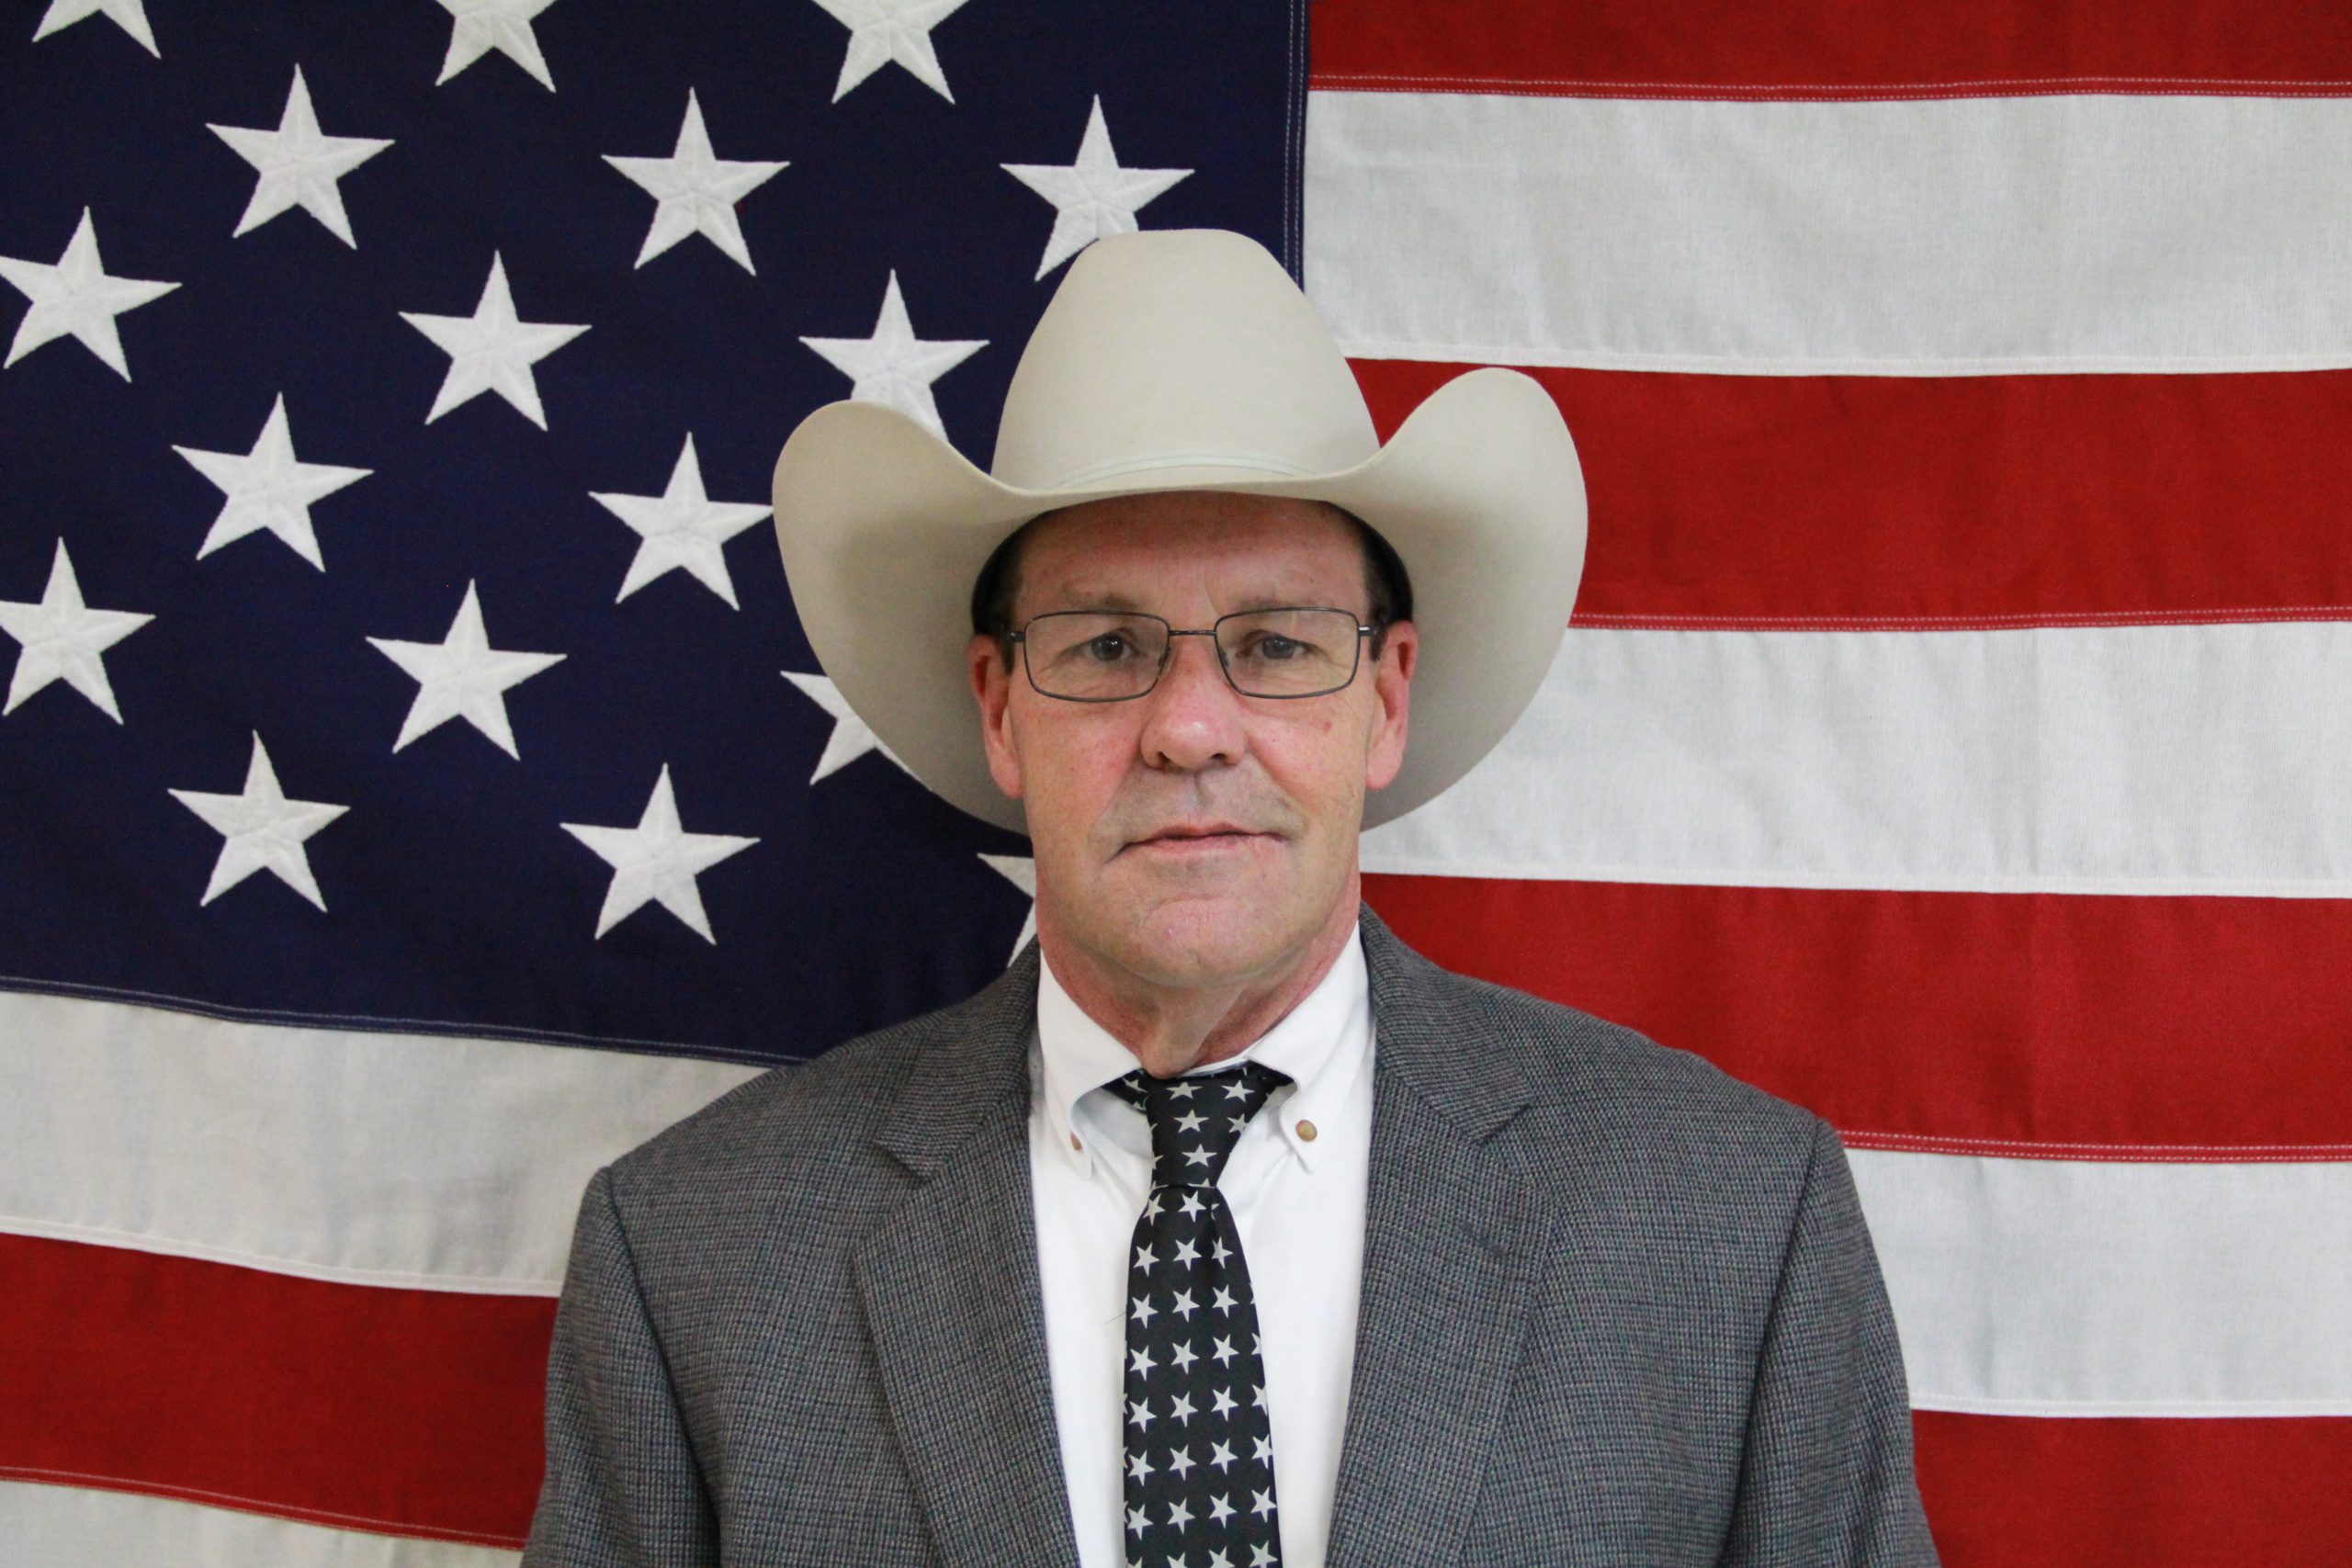 Fundraiser and Raffle for Sheriff Kevin Windham